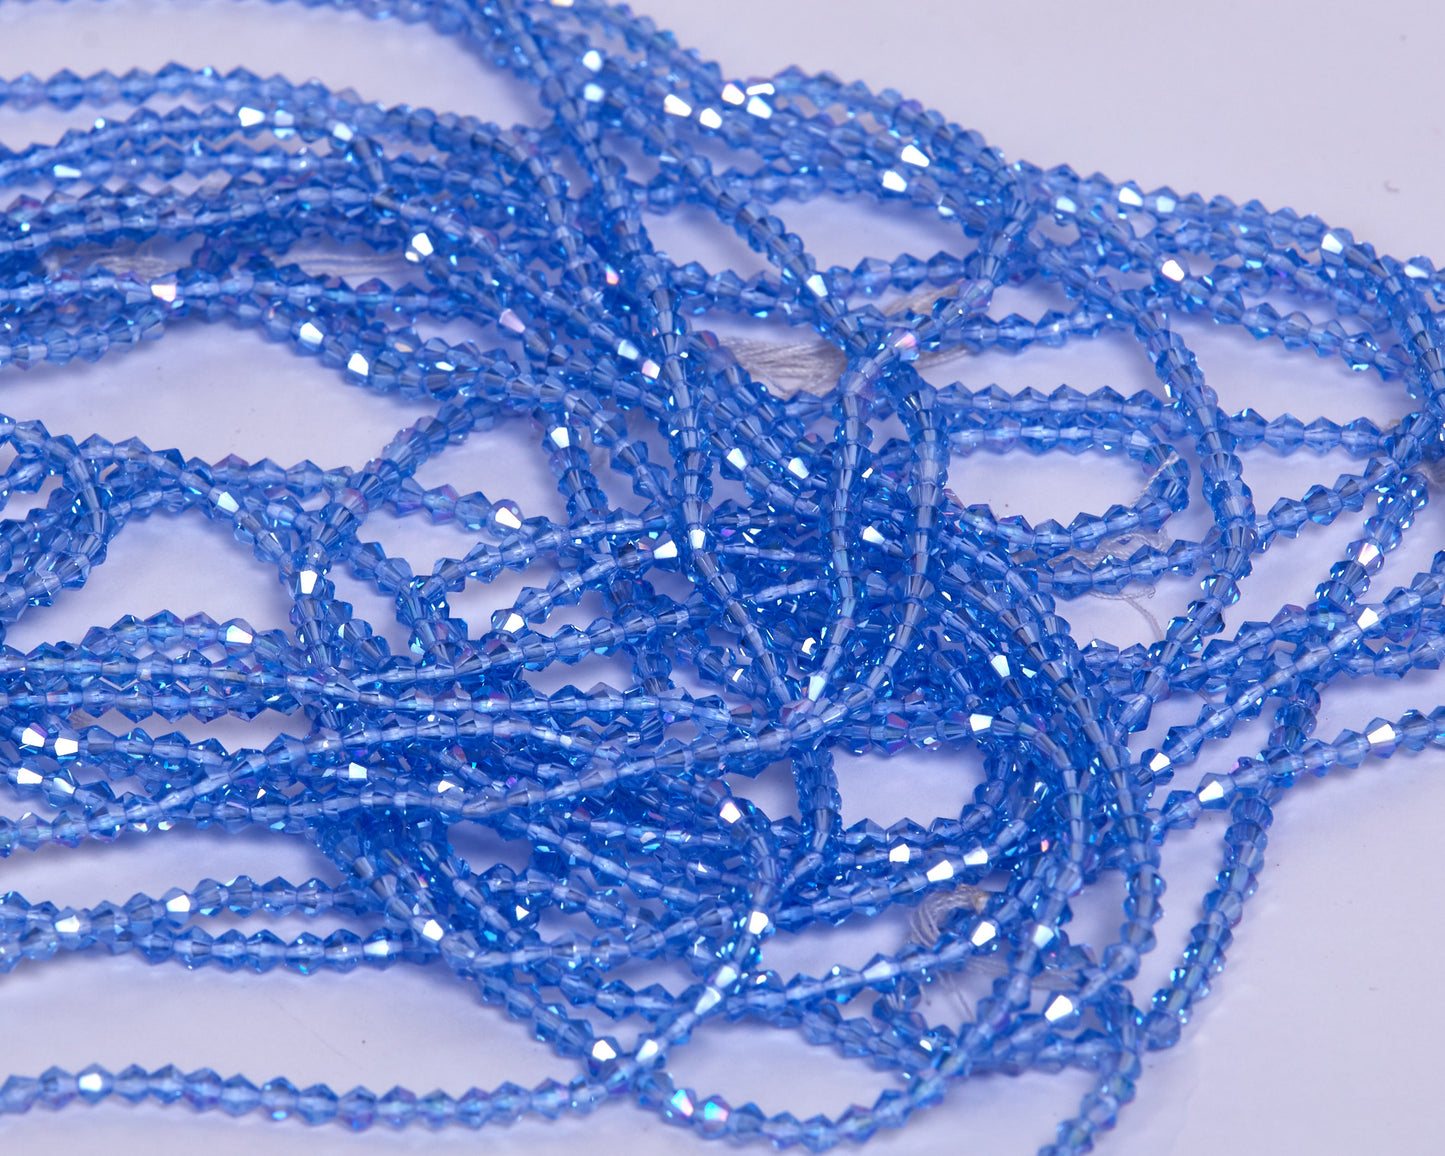 52 Inches Baby blue Shiny Crystal Tie On Waist beads